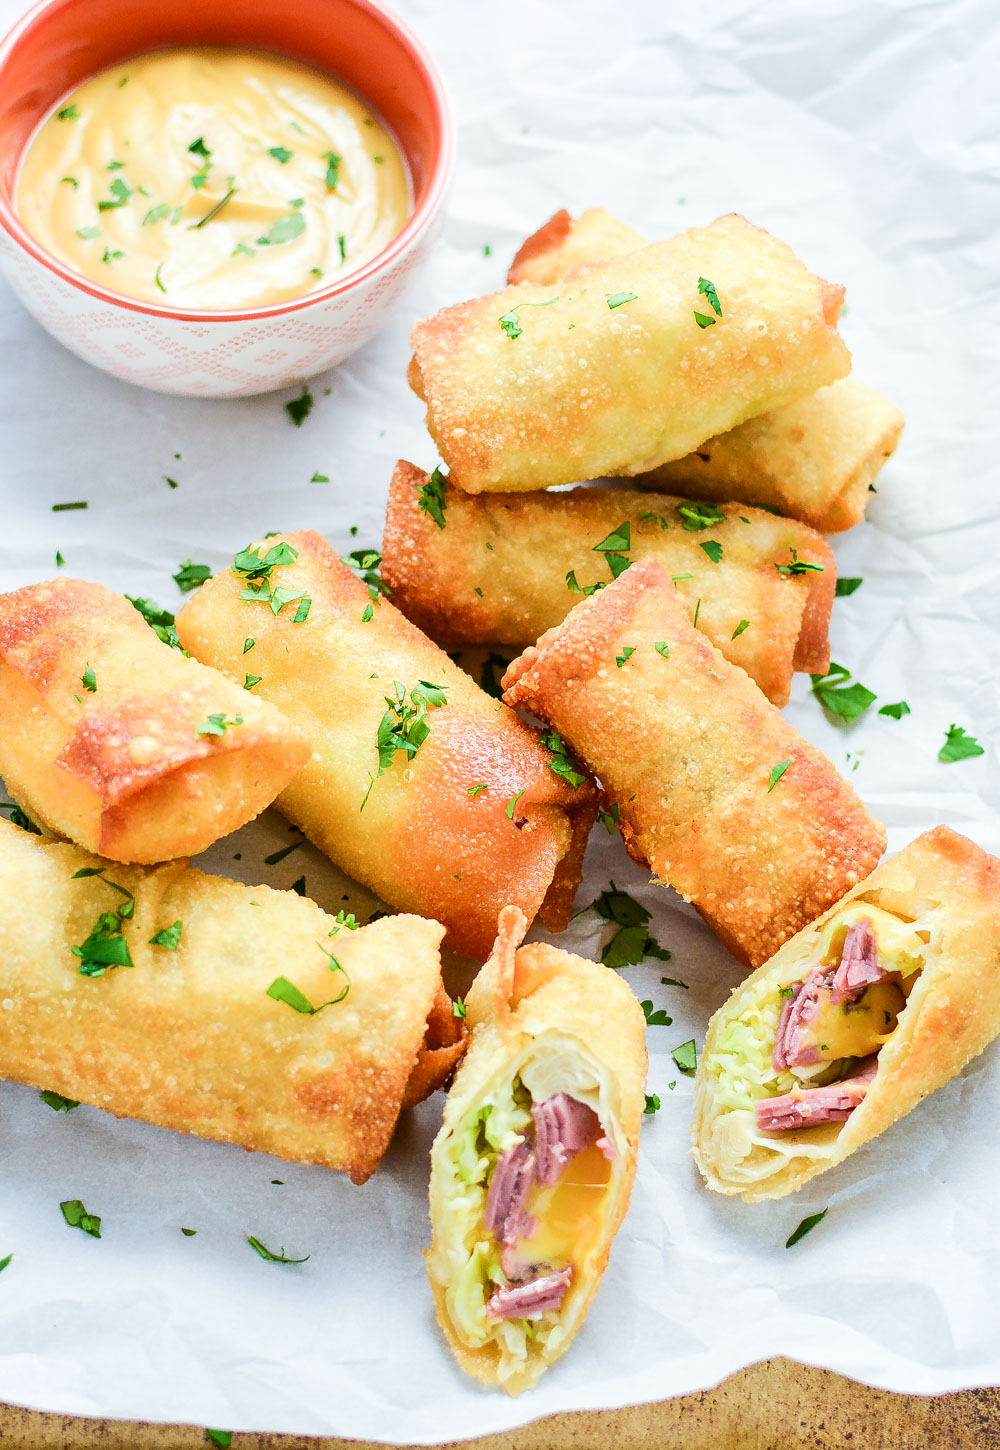 Corned Beef and Cabbage Egg Rolls with Homemade Beer Mustard is the perfect appetizer recipe for St. Patrick's Day!